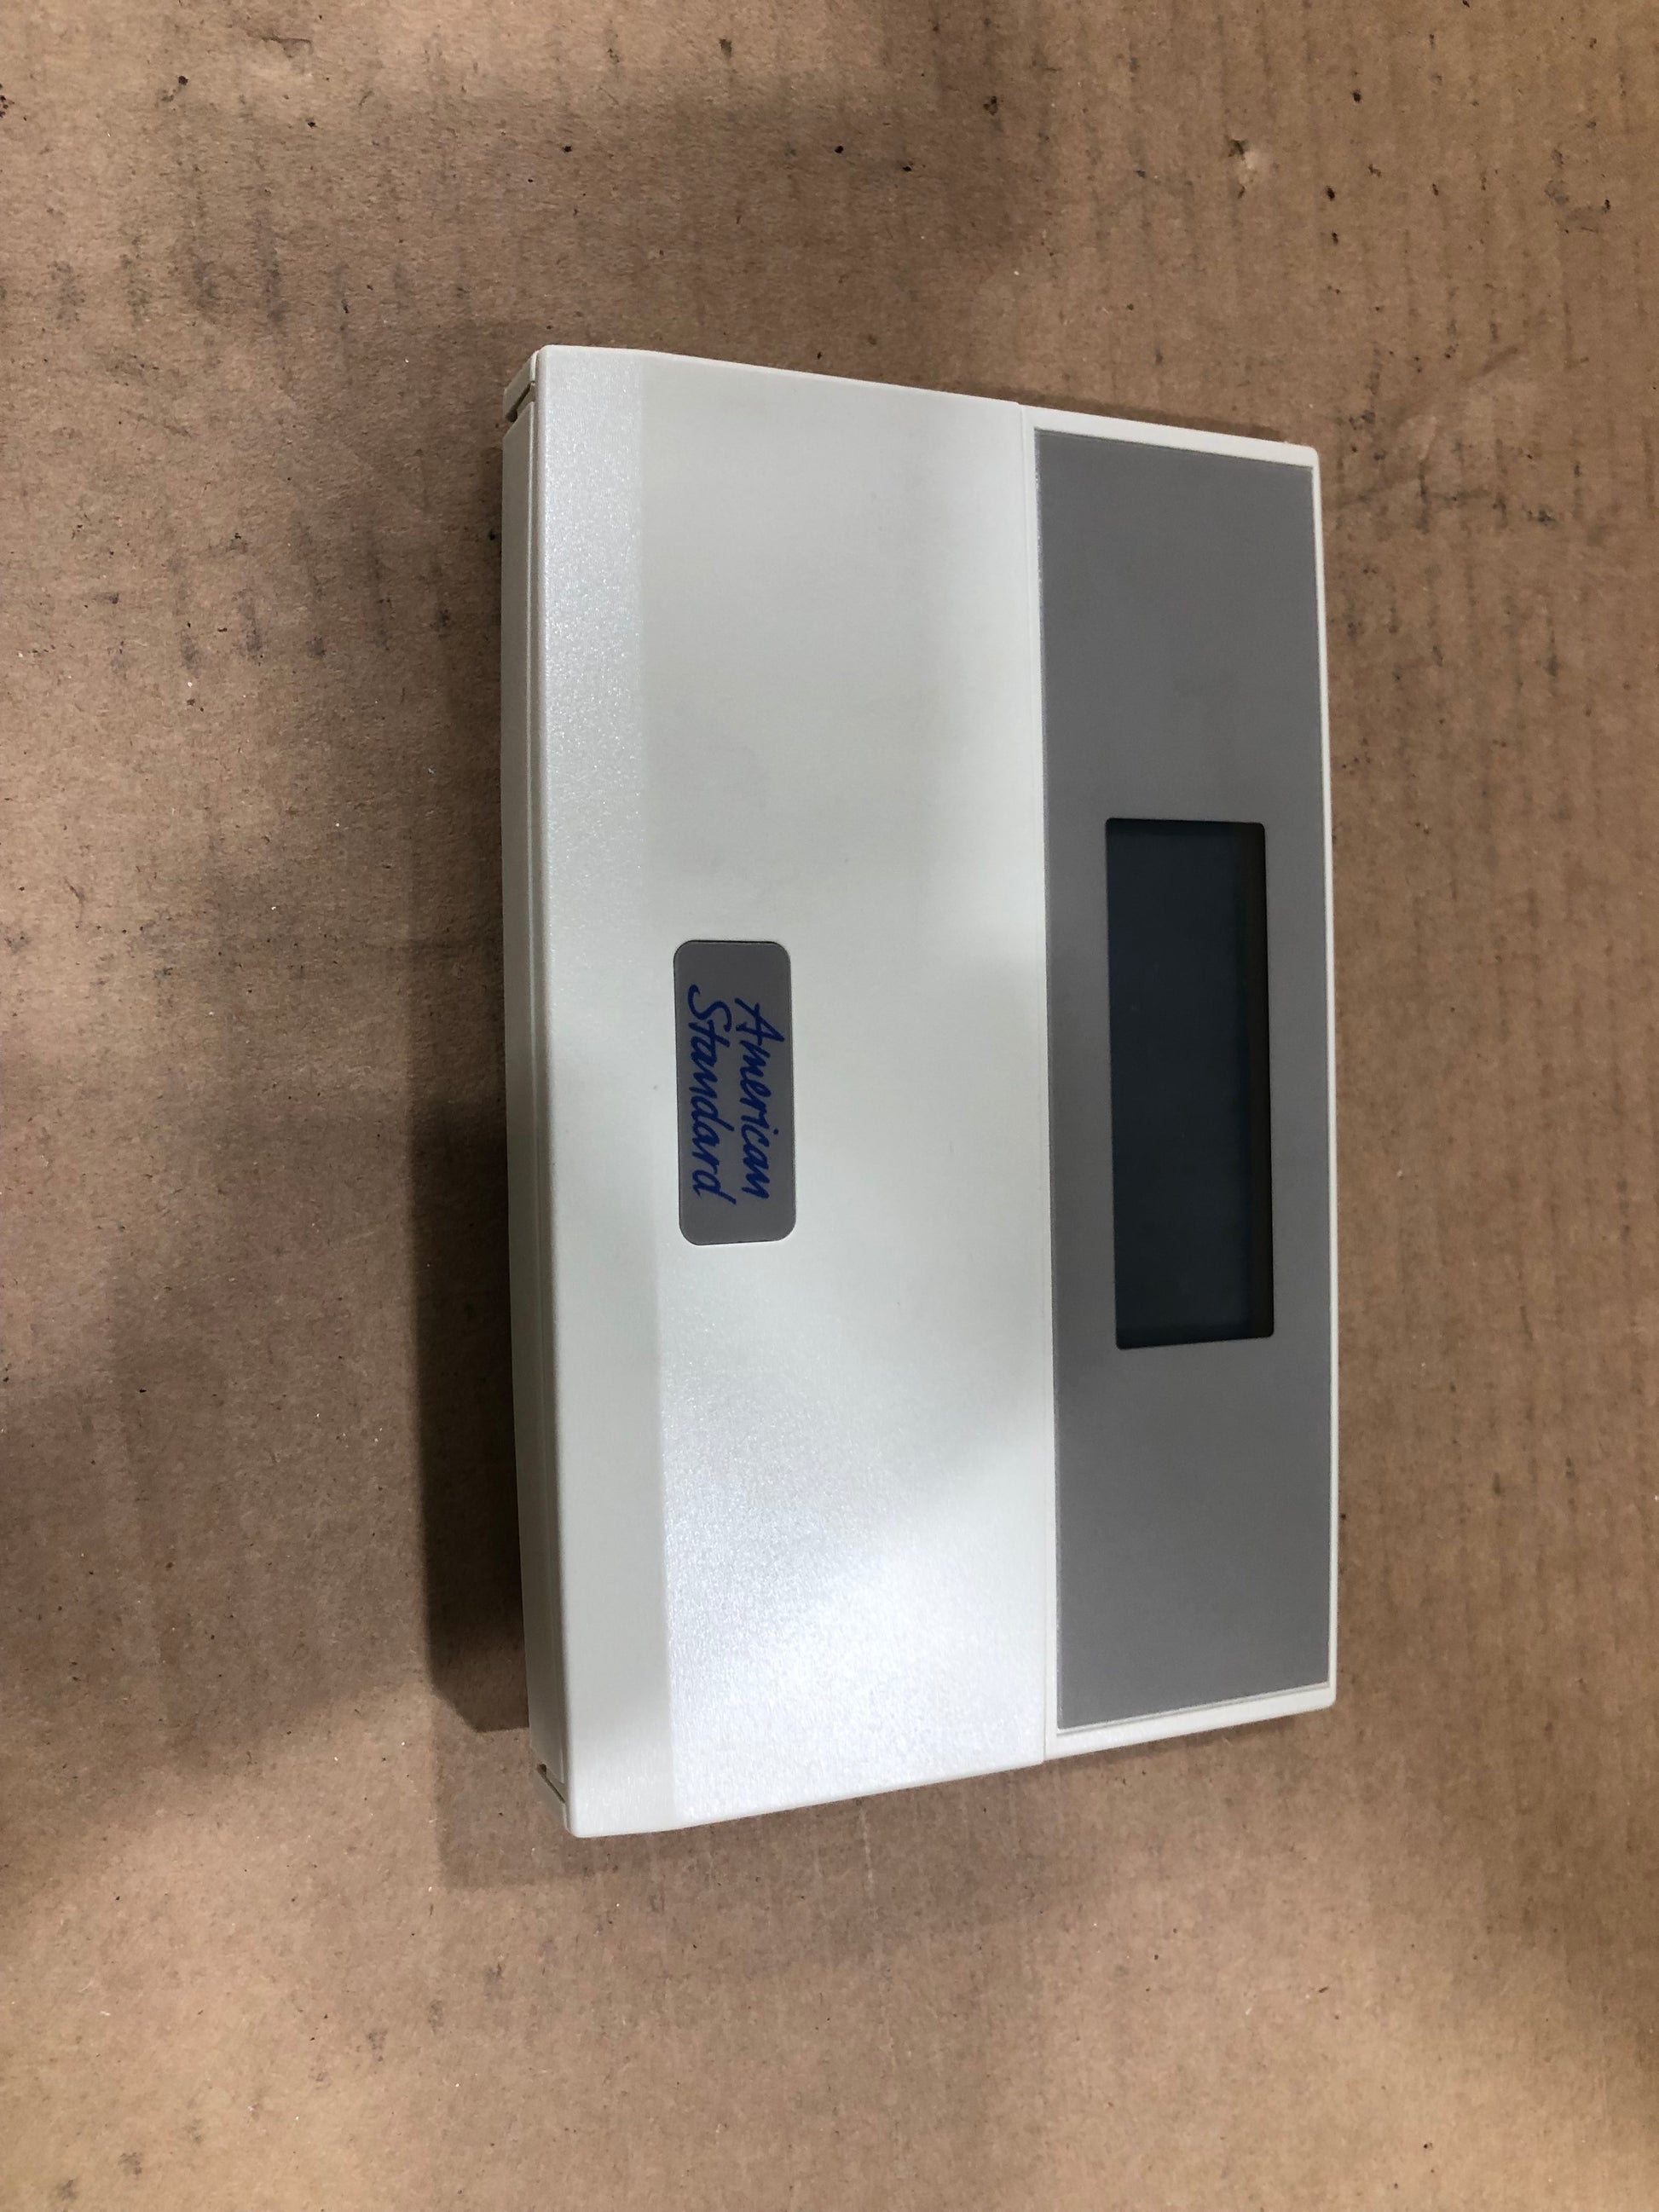 24 VAC PROGRAMMABLE COMMERCIAL THERMOSTAT